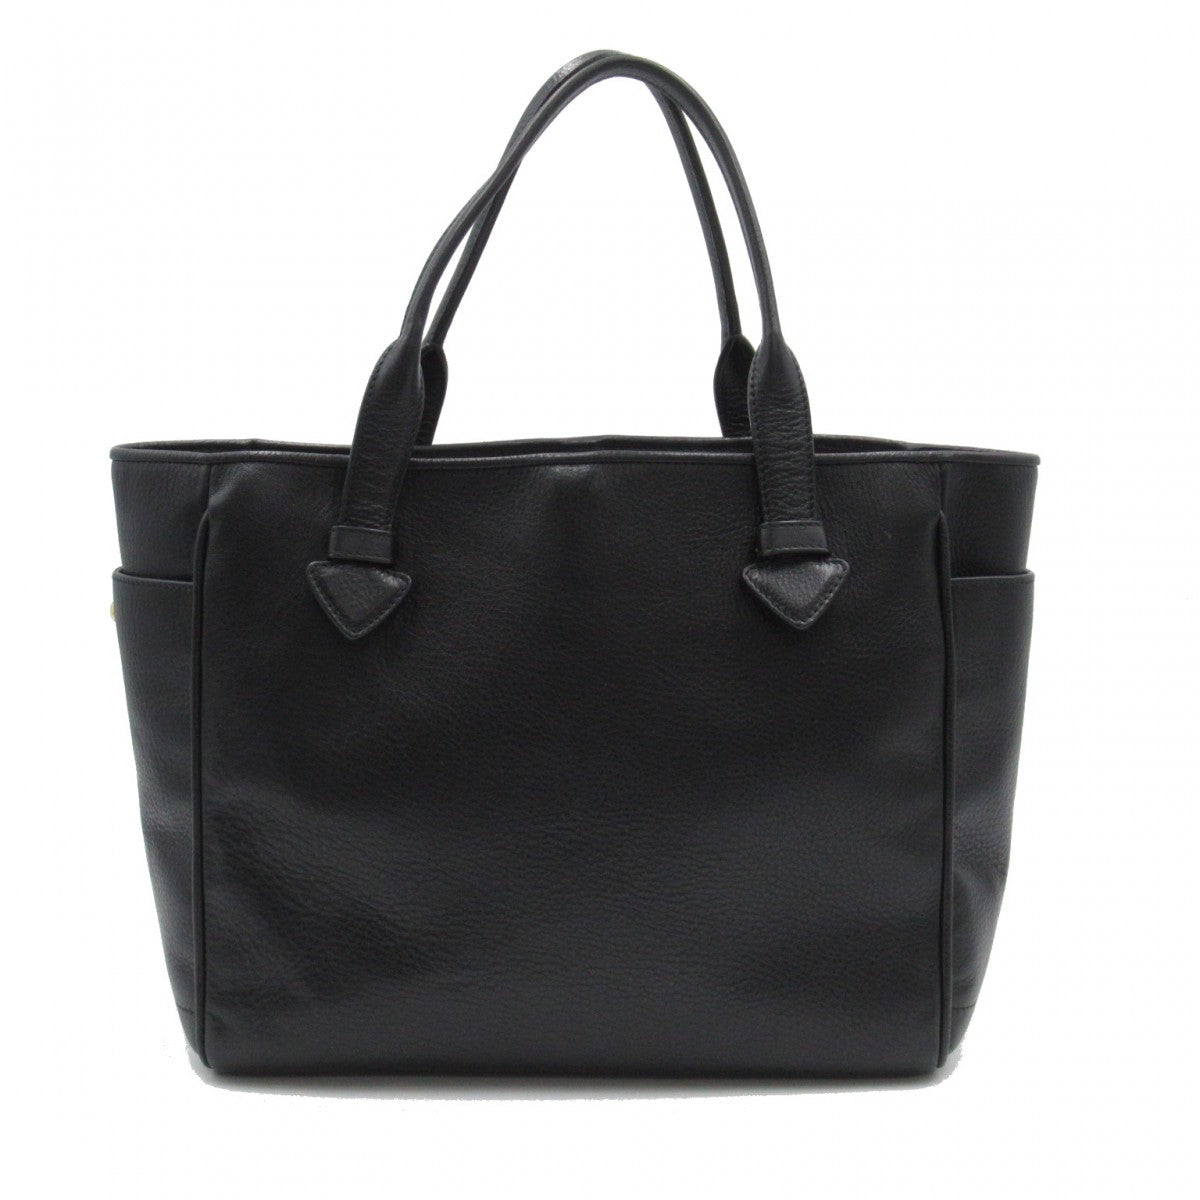 Heritage Leather Tote Bag